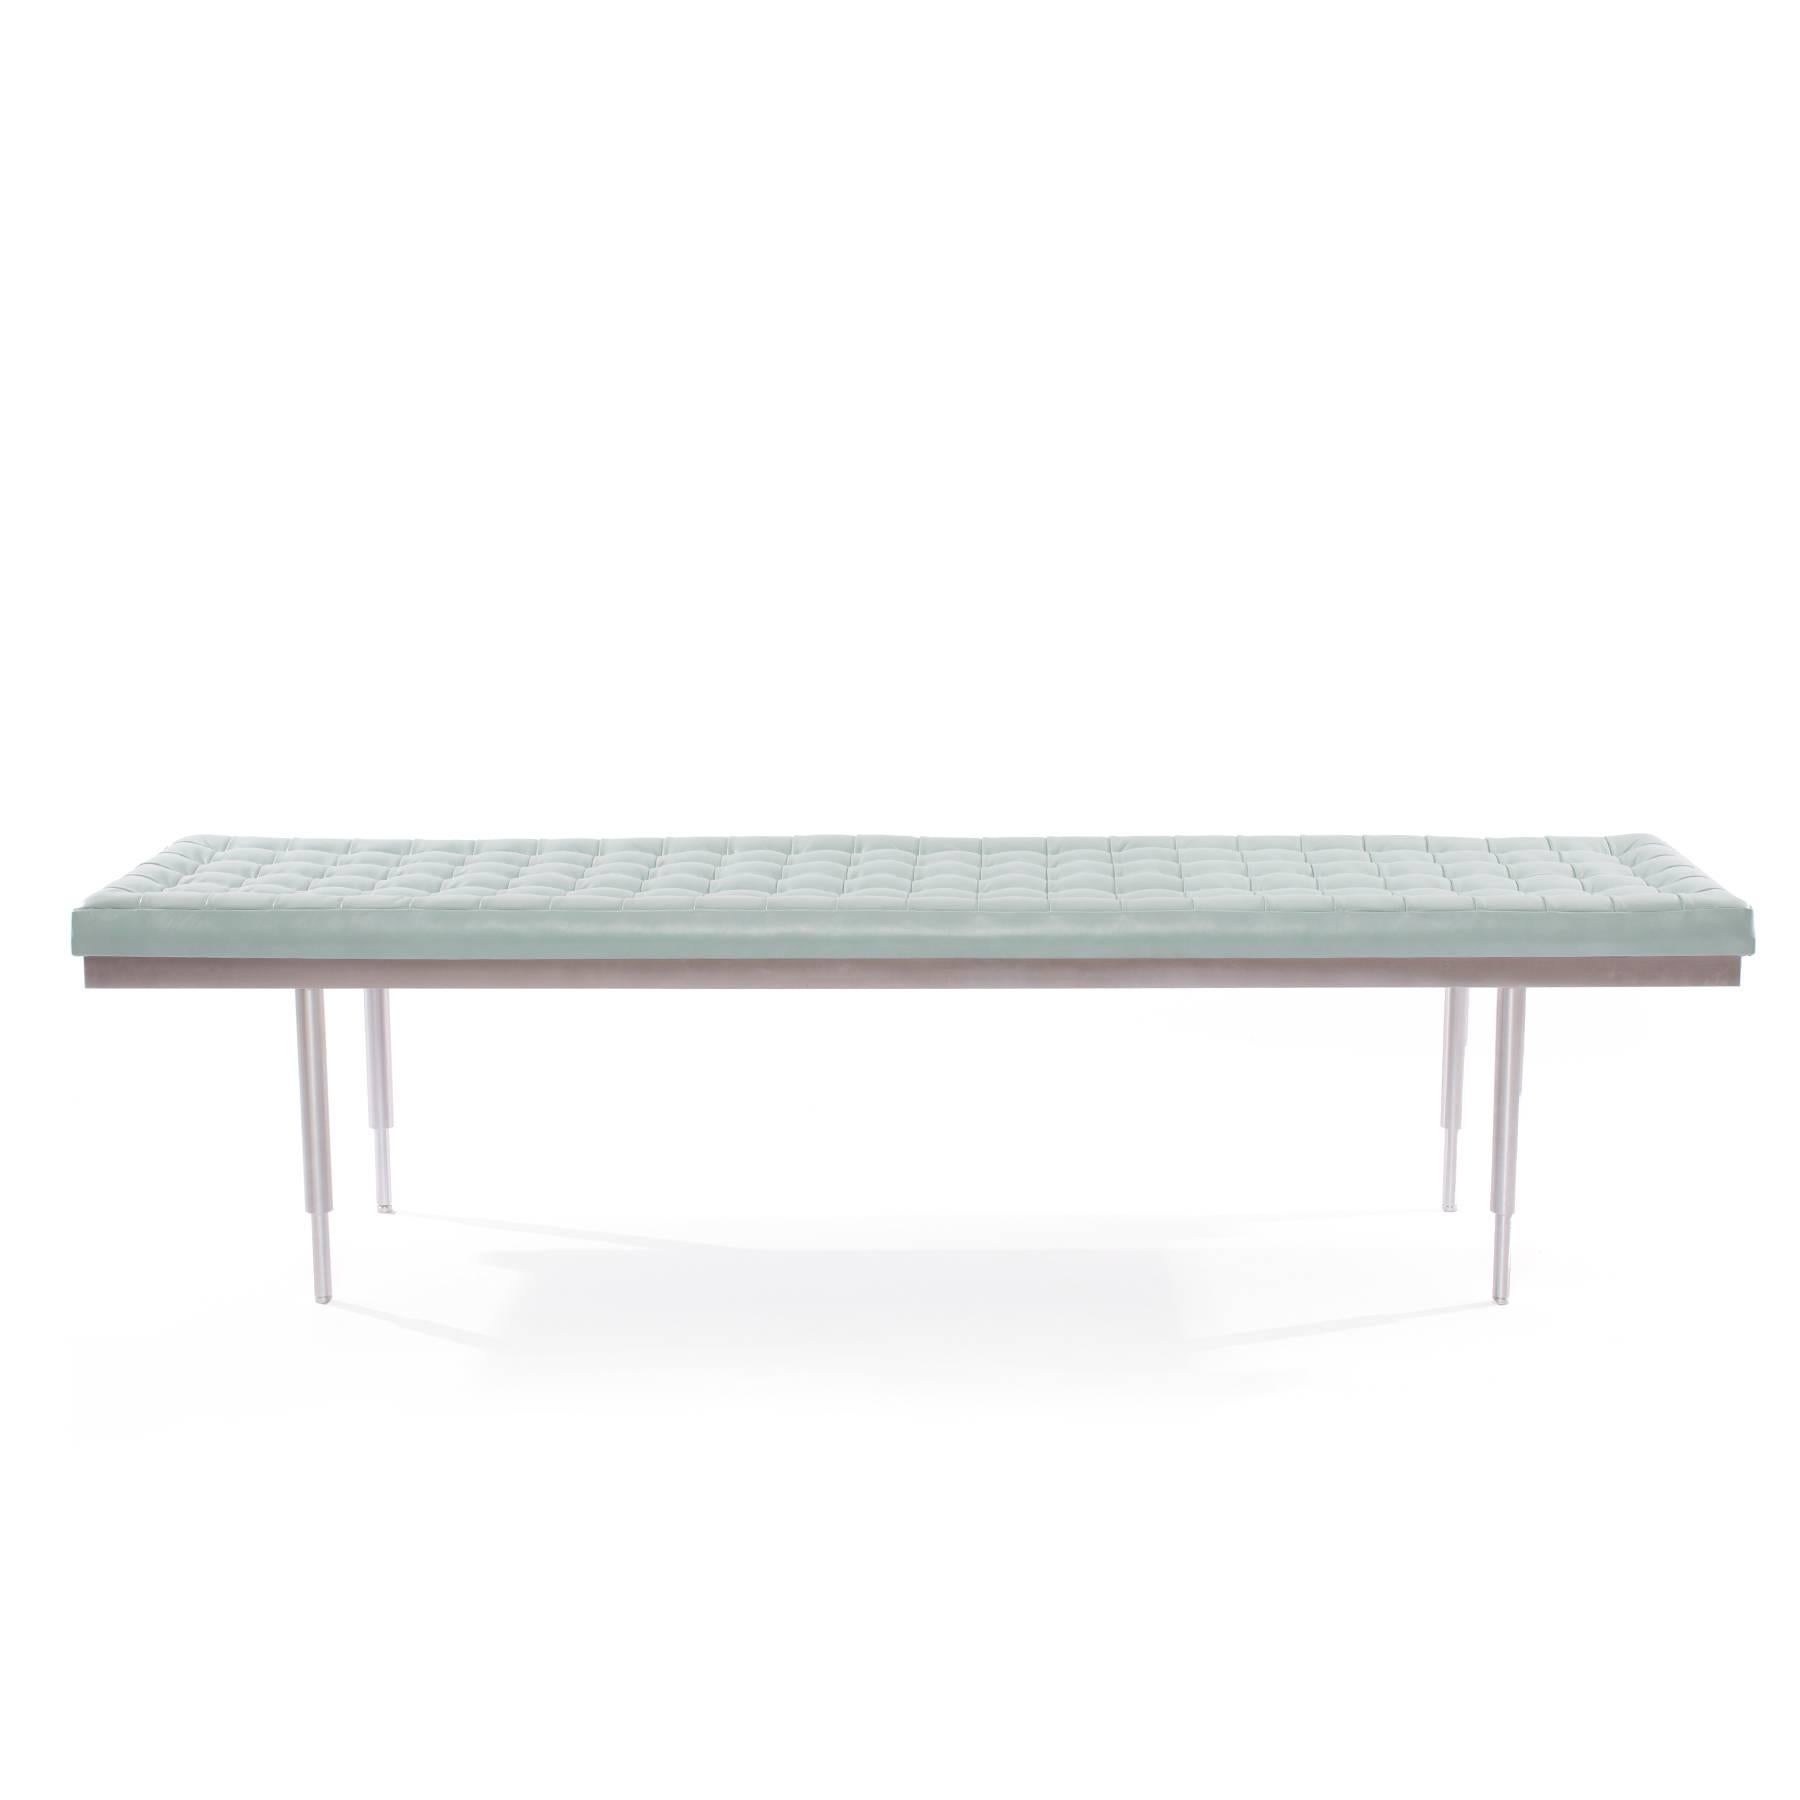 Micro tufted leather and aluminum bench circa late 1970's. This example has satin finished aluminum legs and stretchers and has been newly upholstered in a buttery soft powder blue leather. 